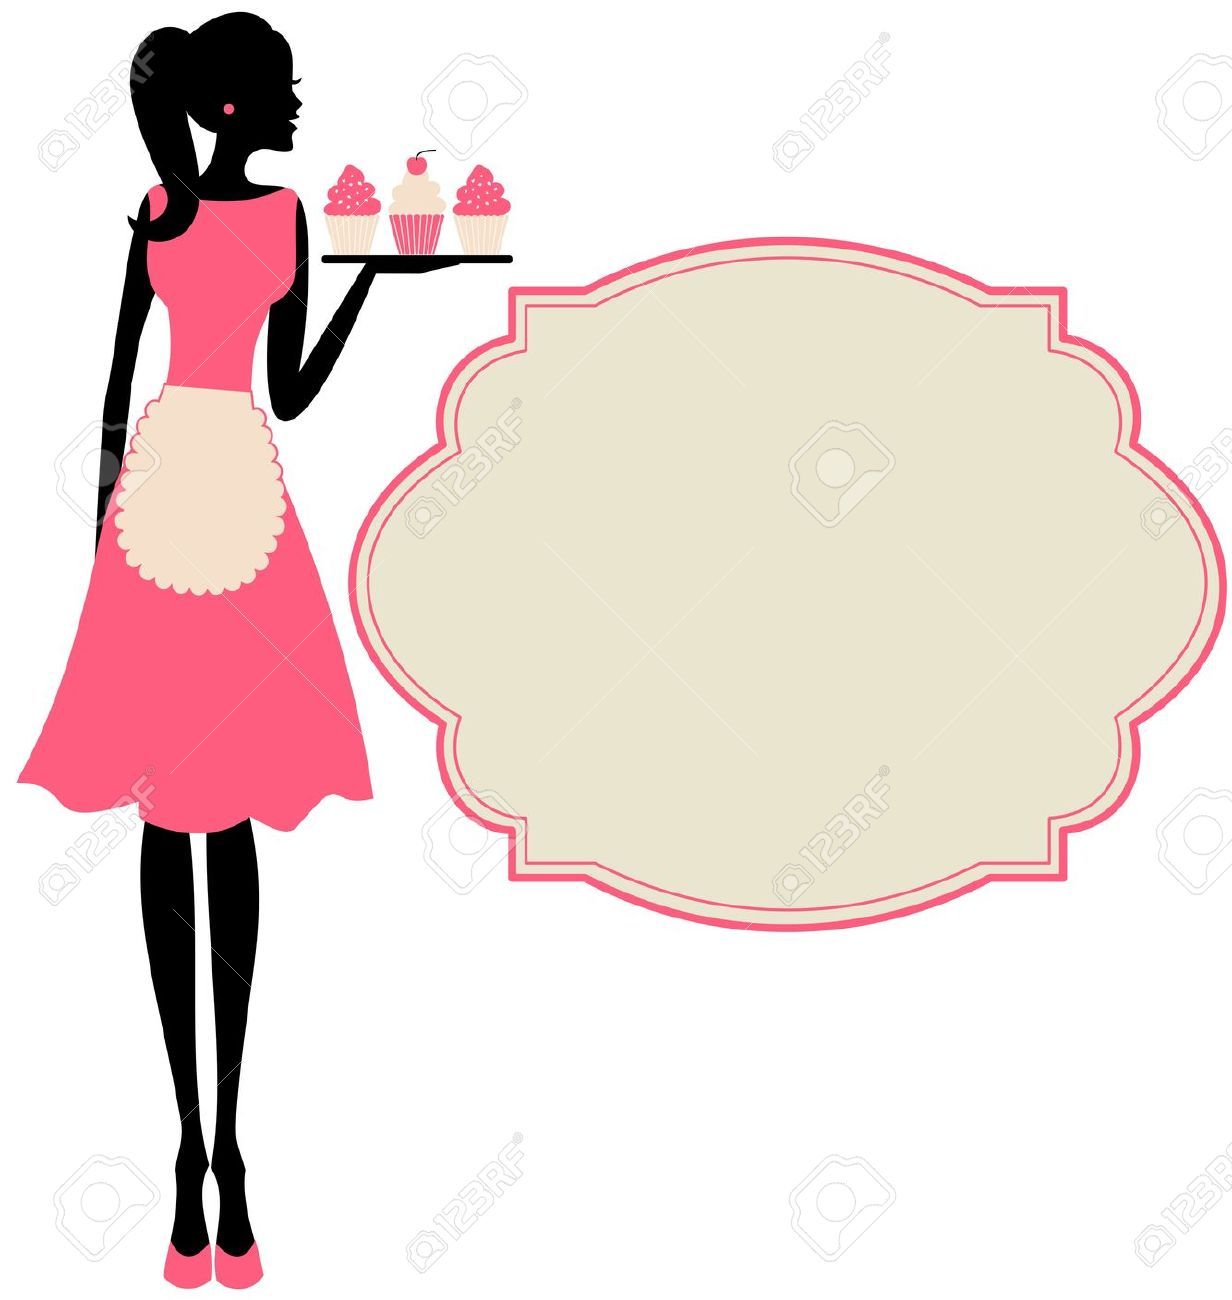 Woman Apron Cliparts, Stock Vector And Royalty Free Woman